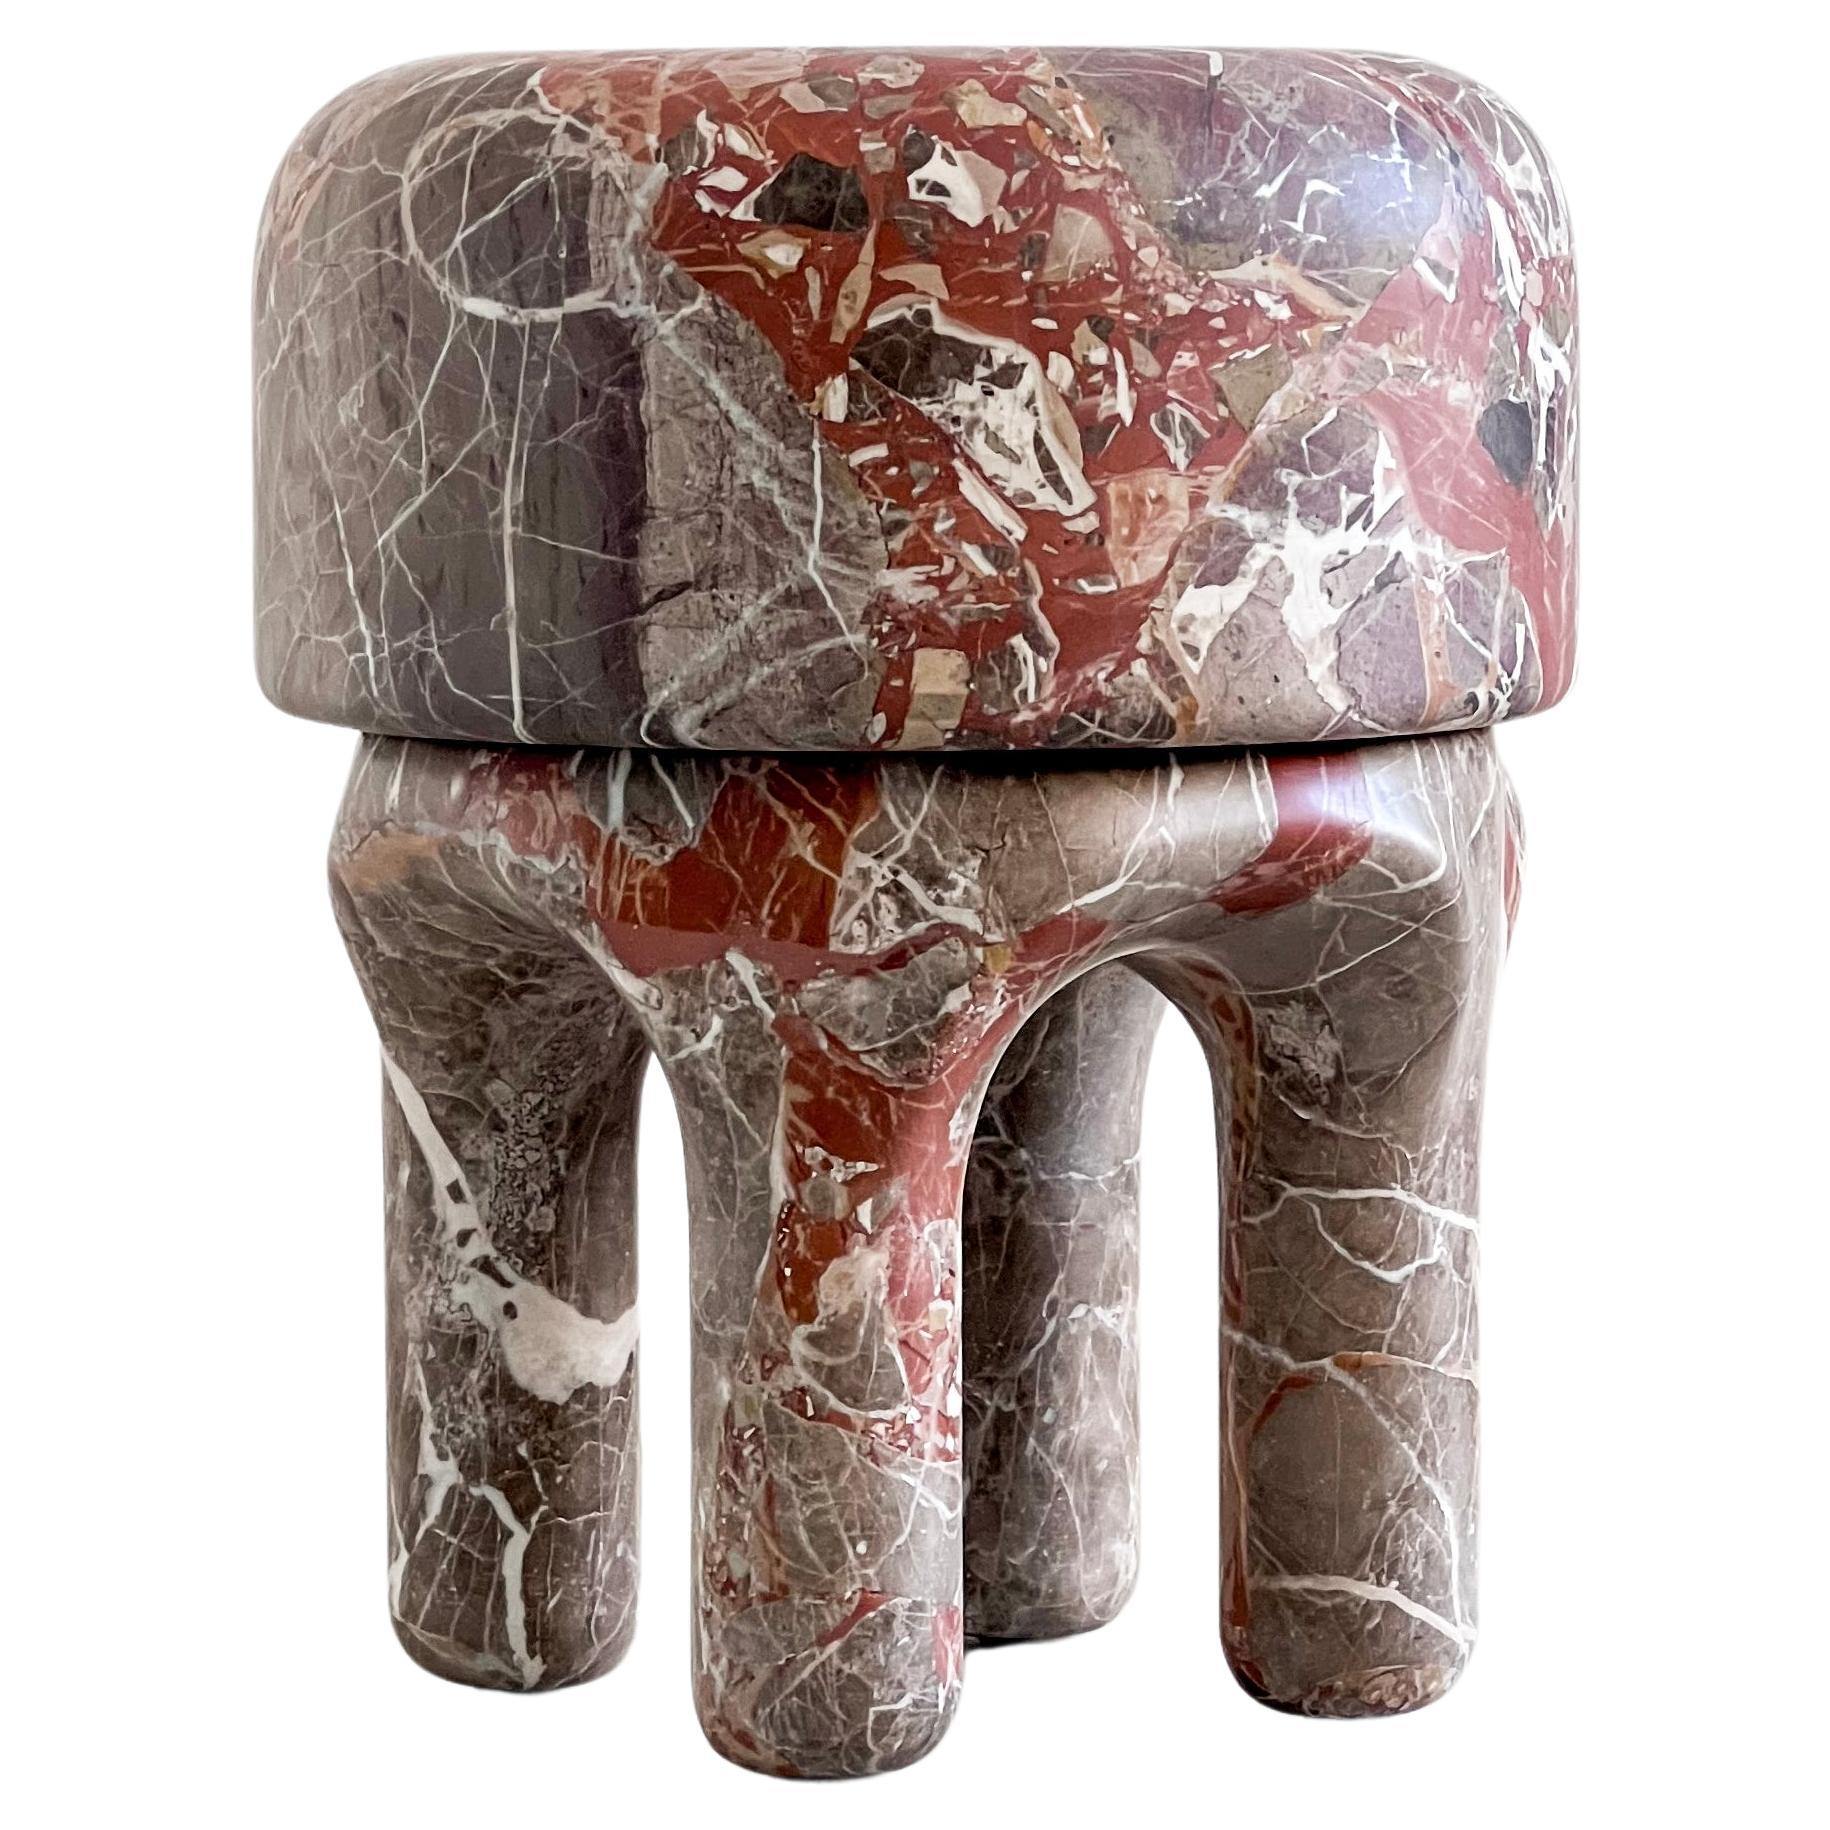 Sculptural Stool in Marble, Italian Collectible Design